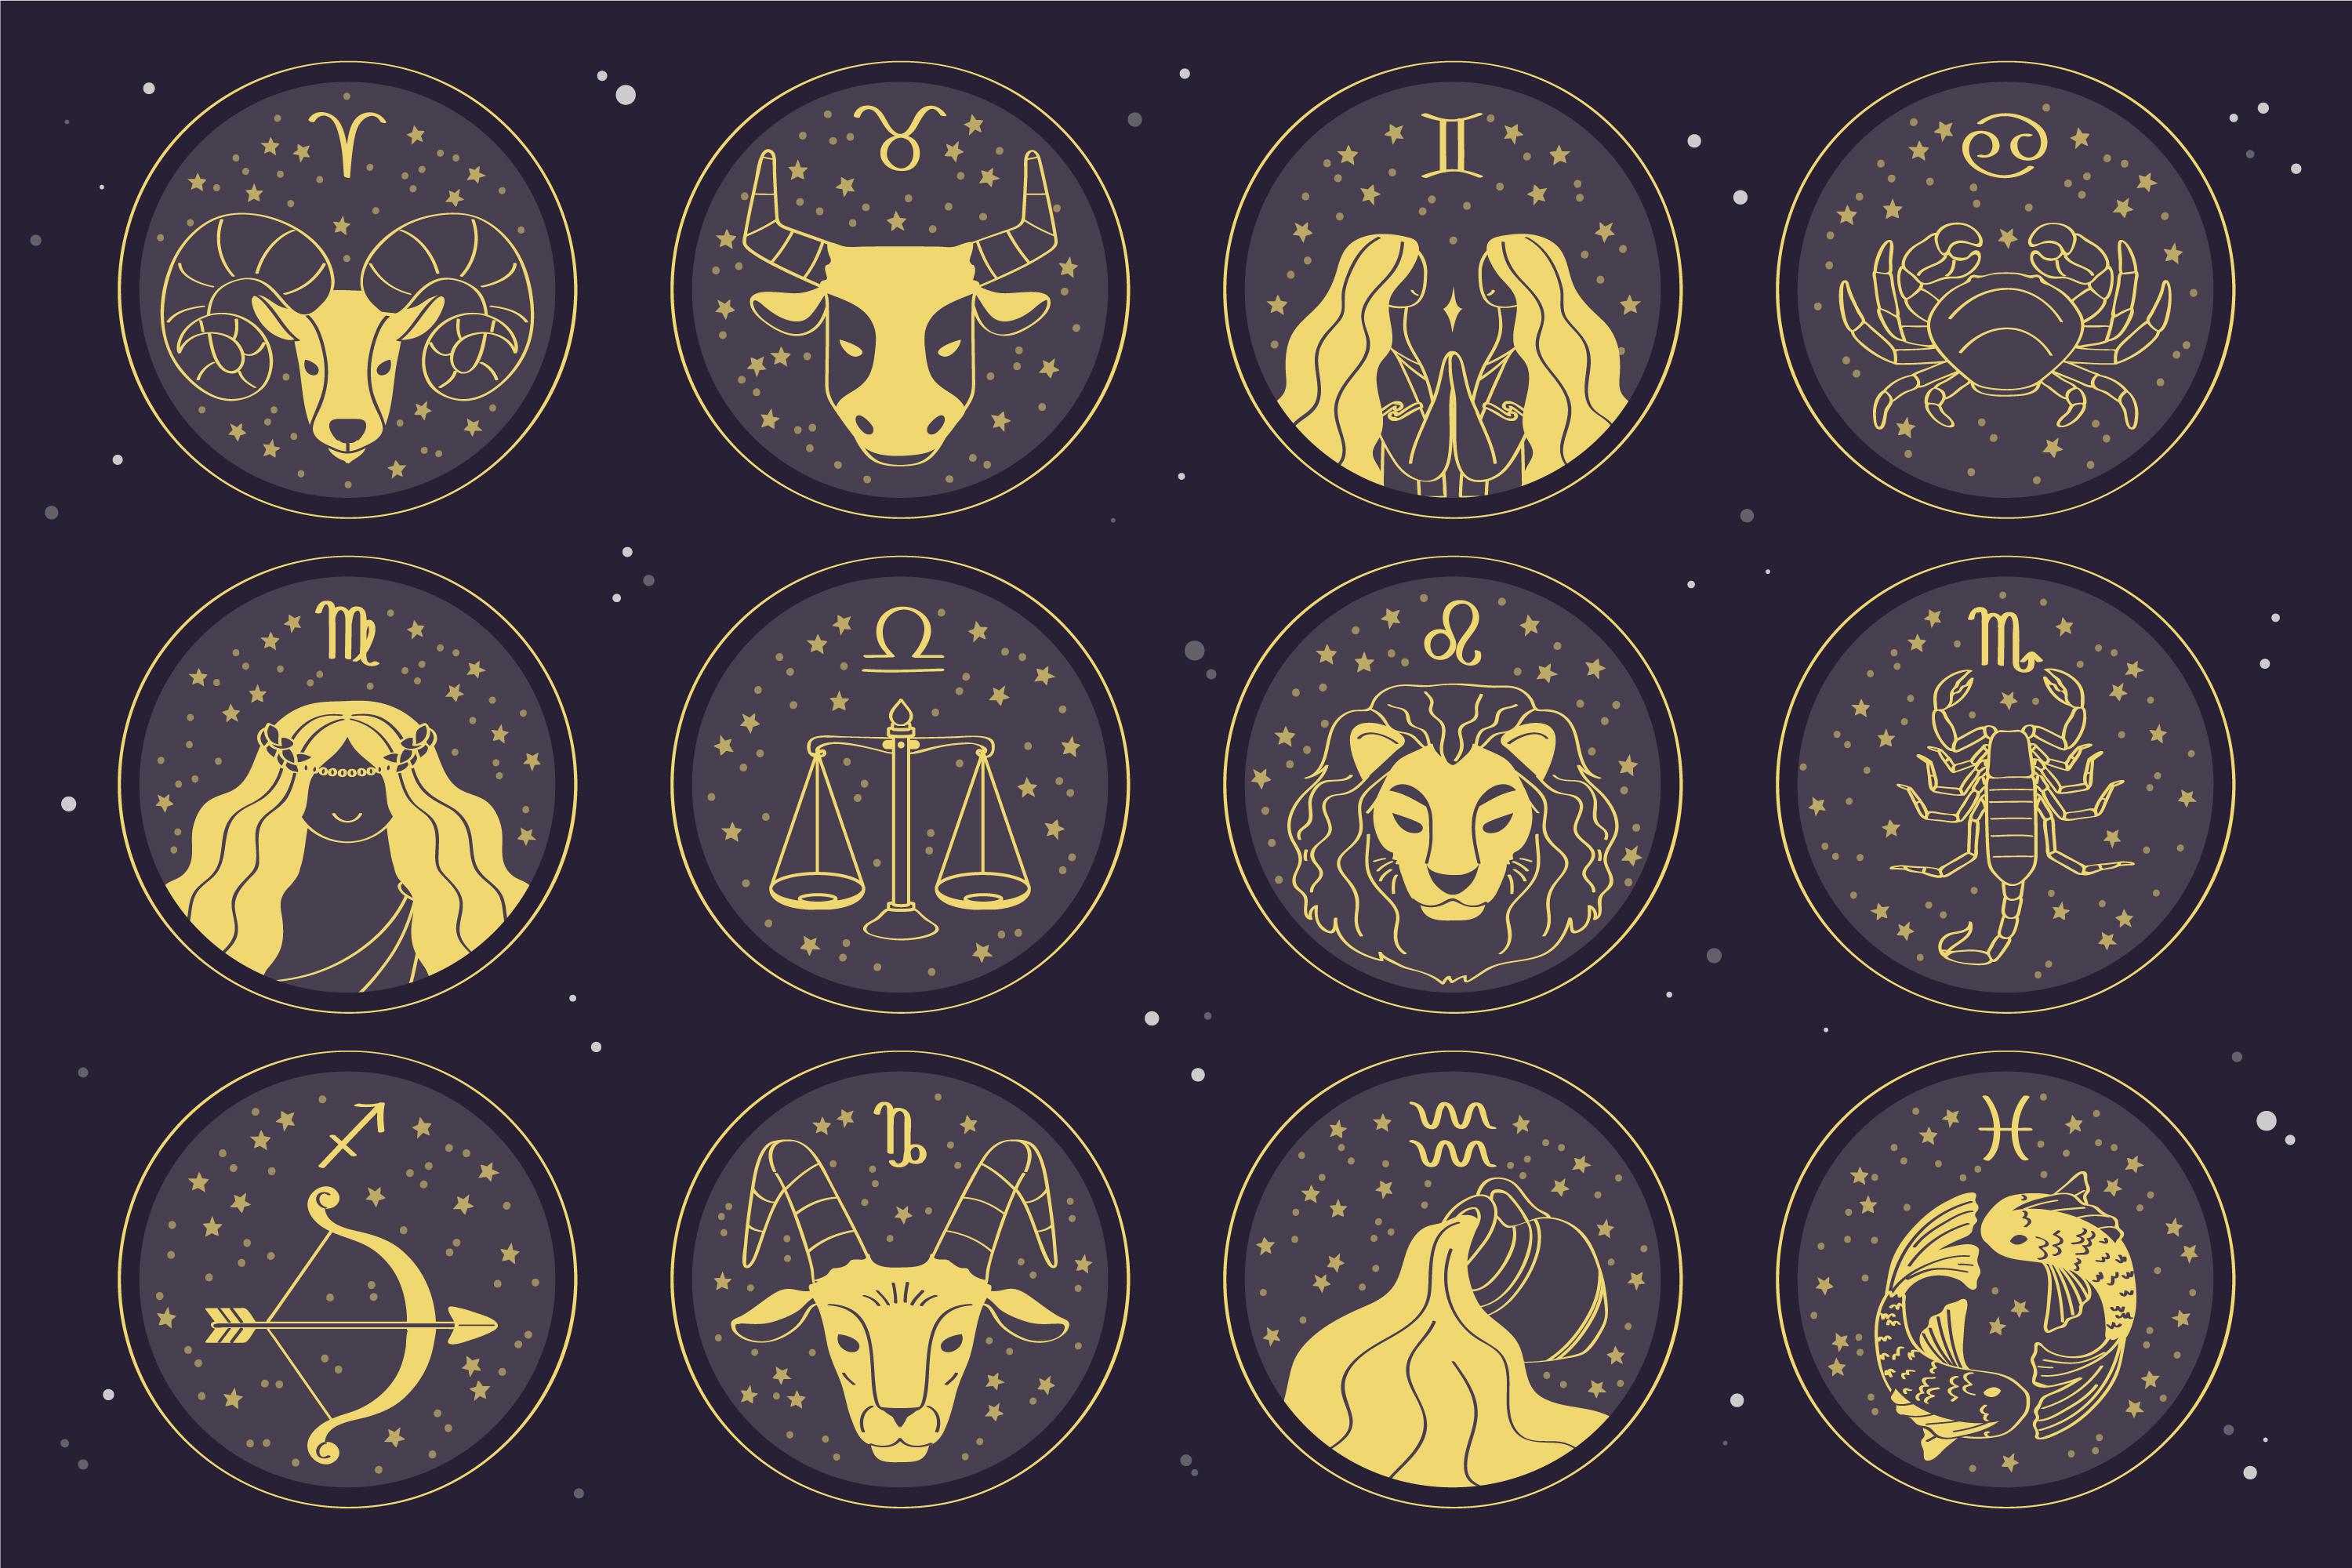 The Top 5 Most Faithful Zodiac Signs, Is Yours Among Them?